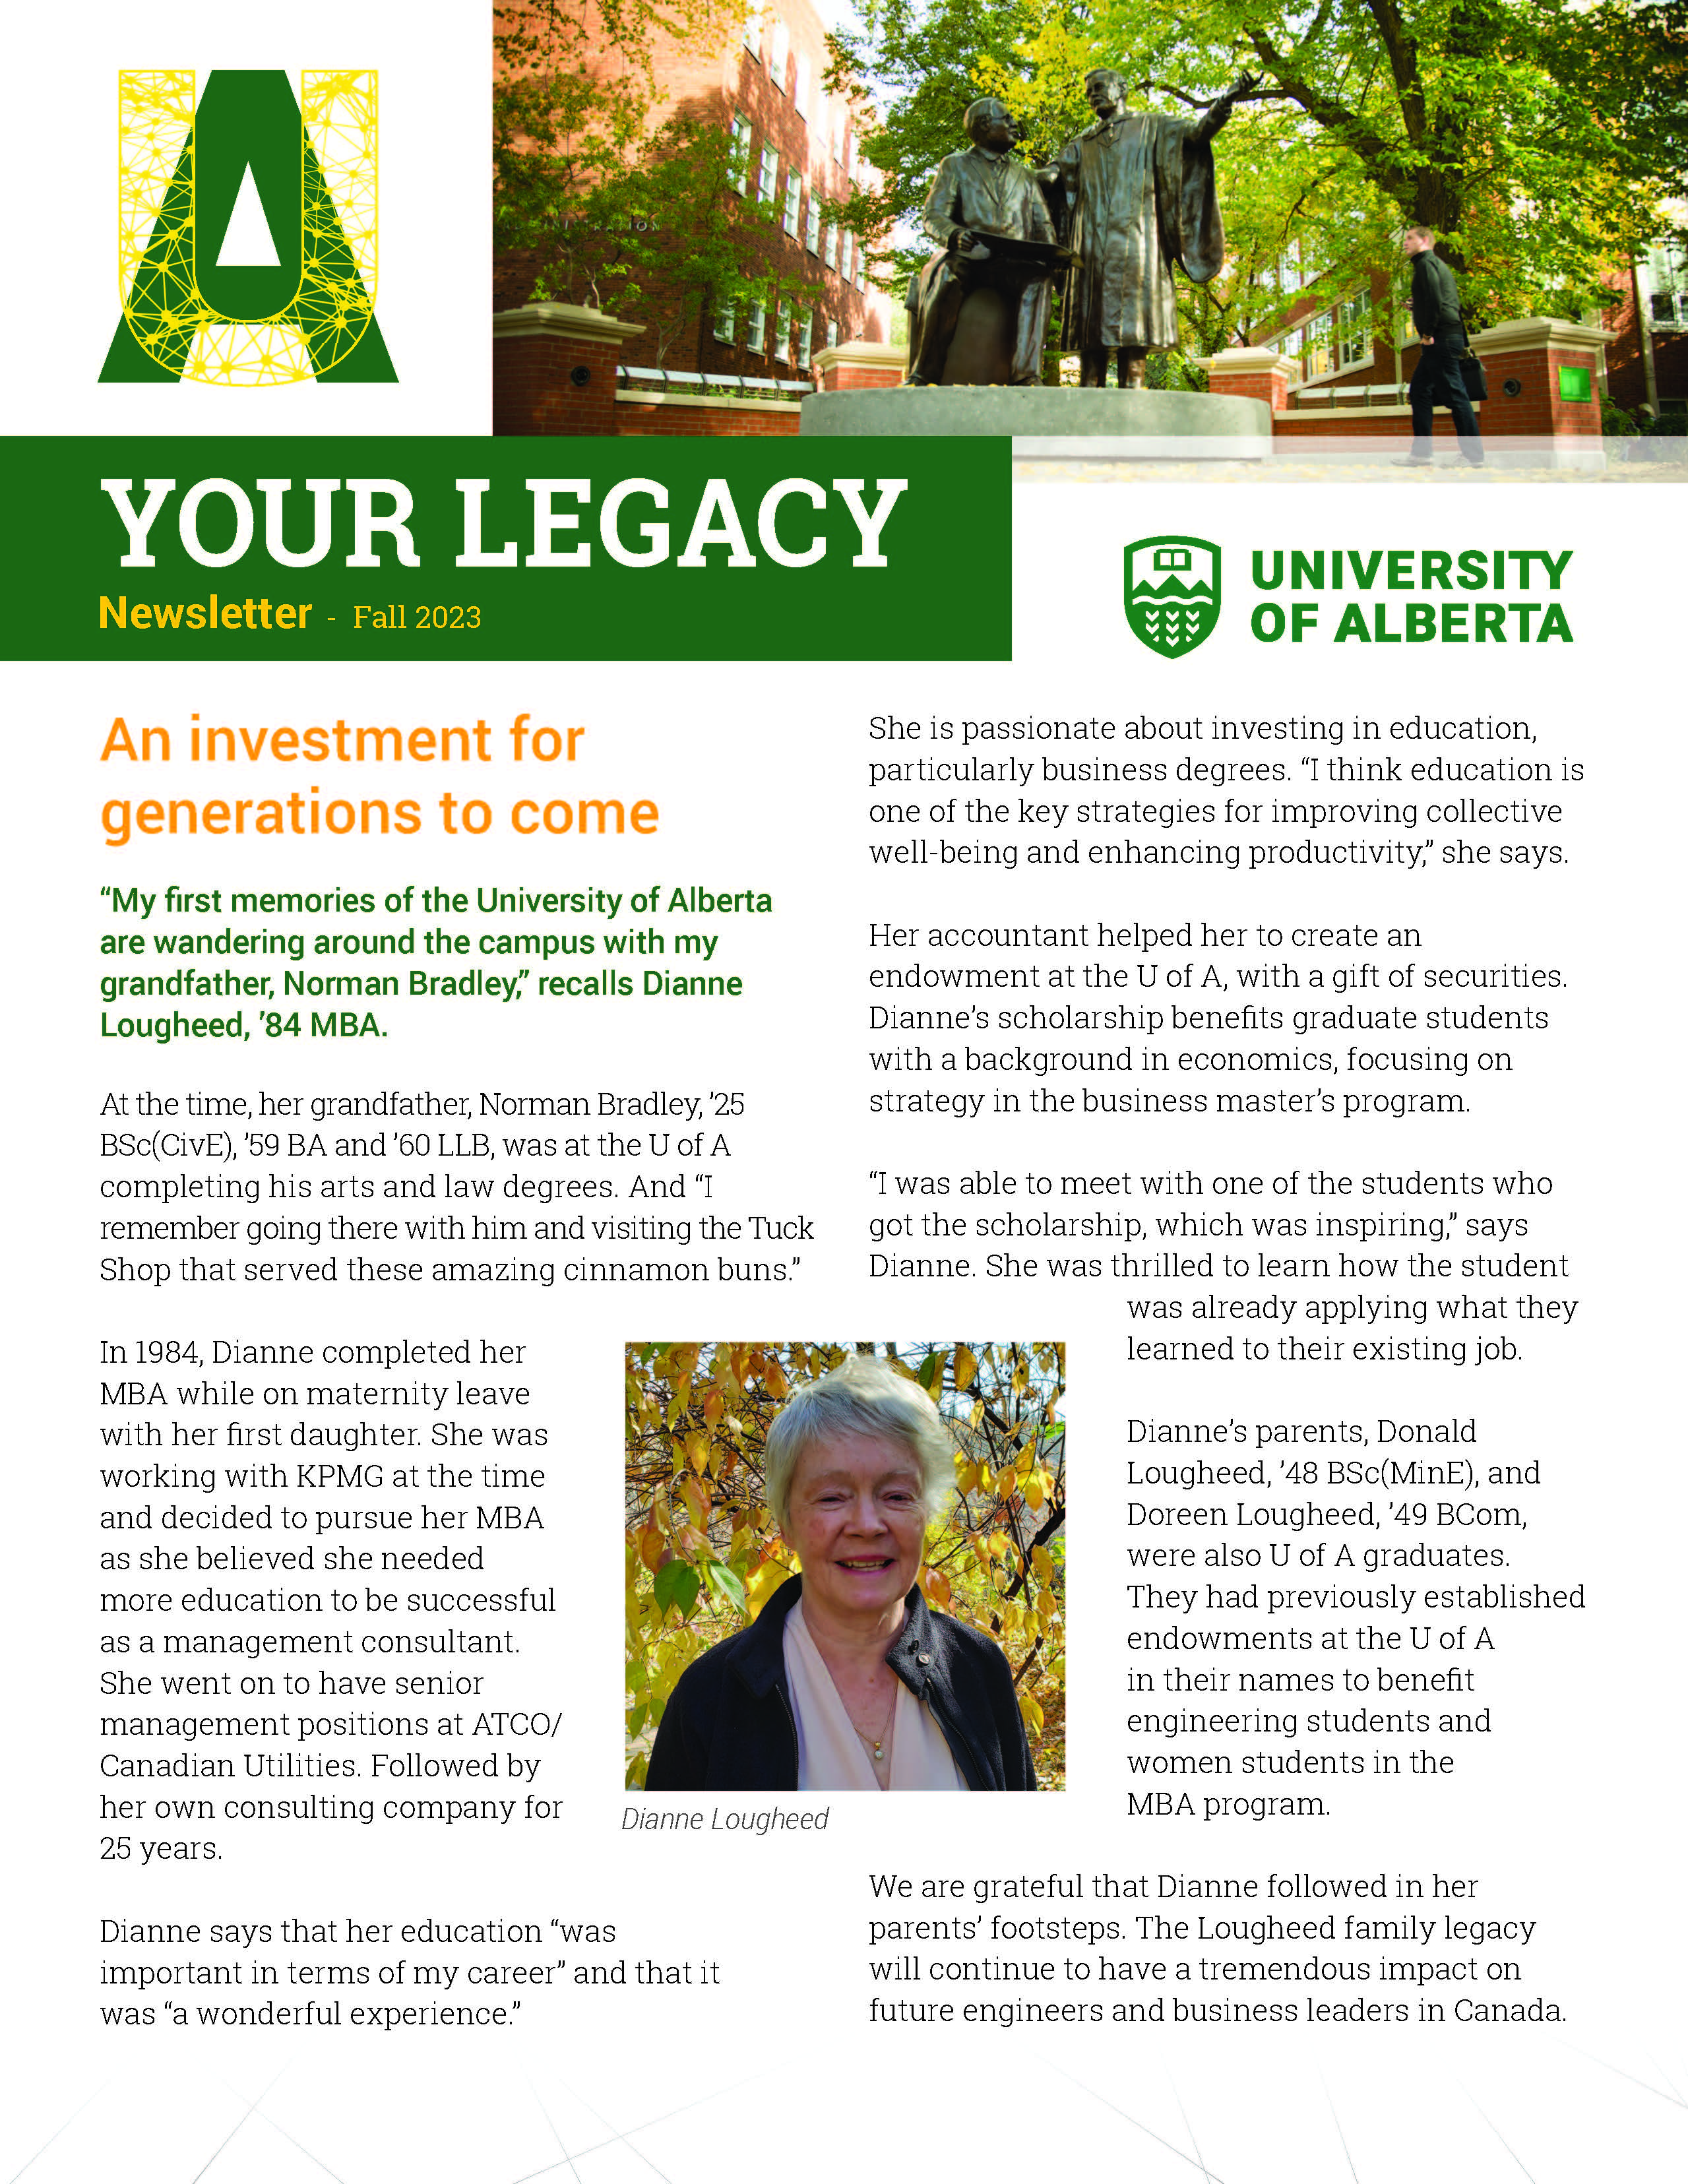 Your Legacy Fall 2023 newsletter